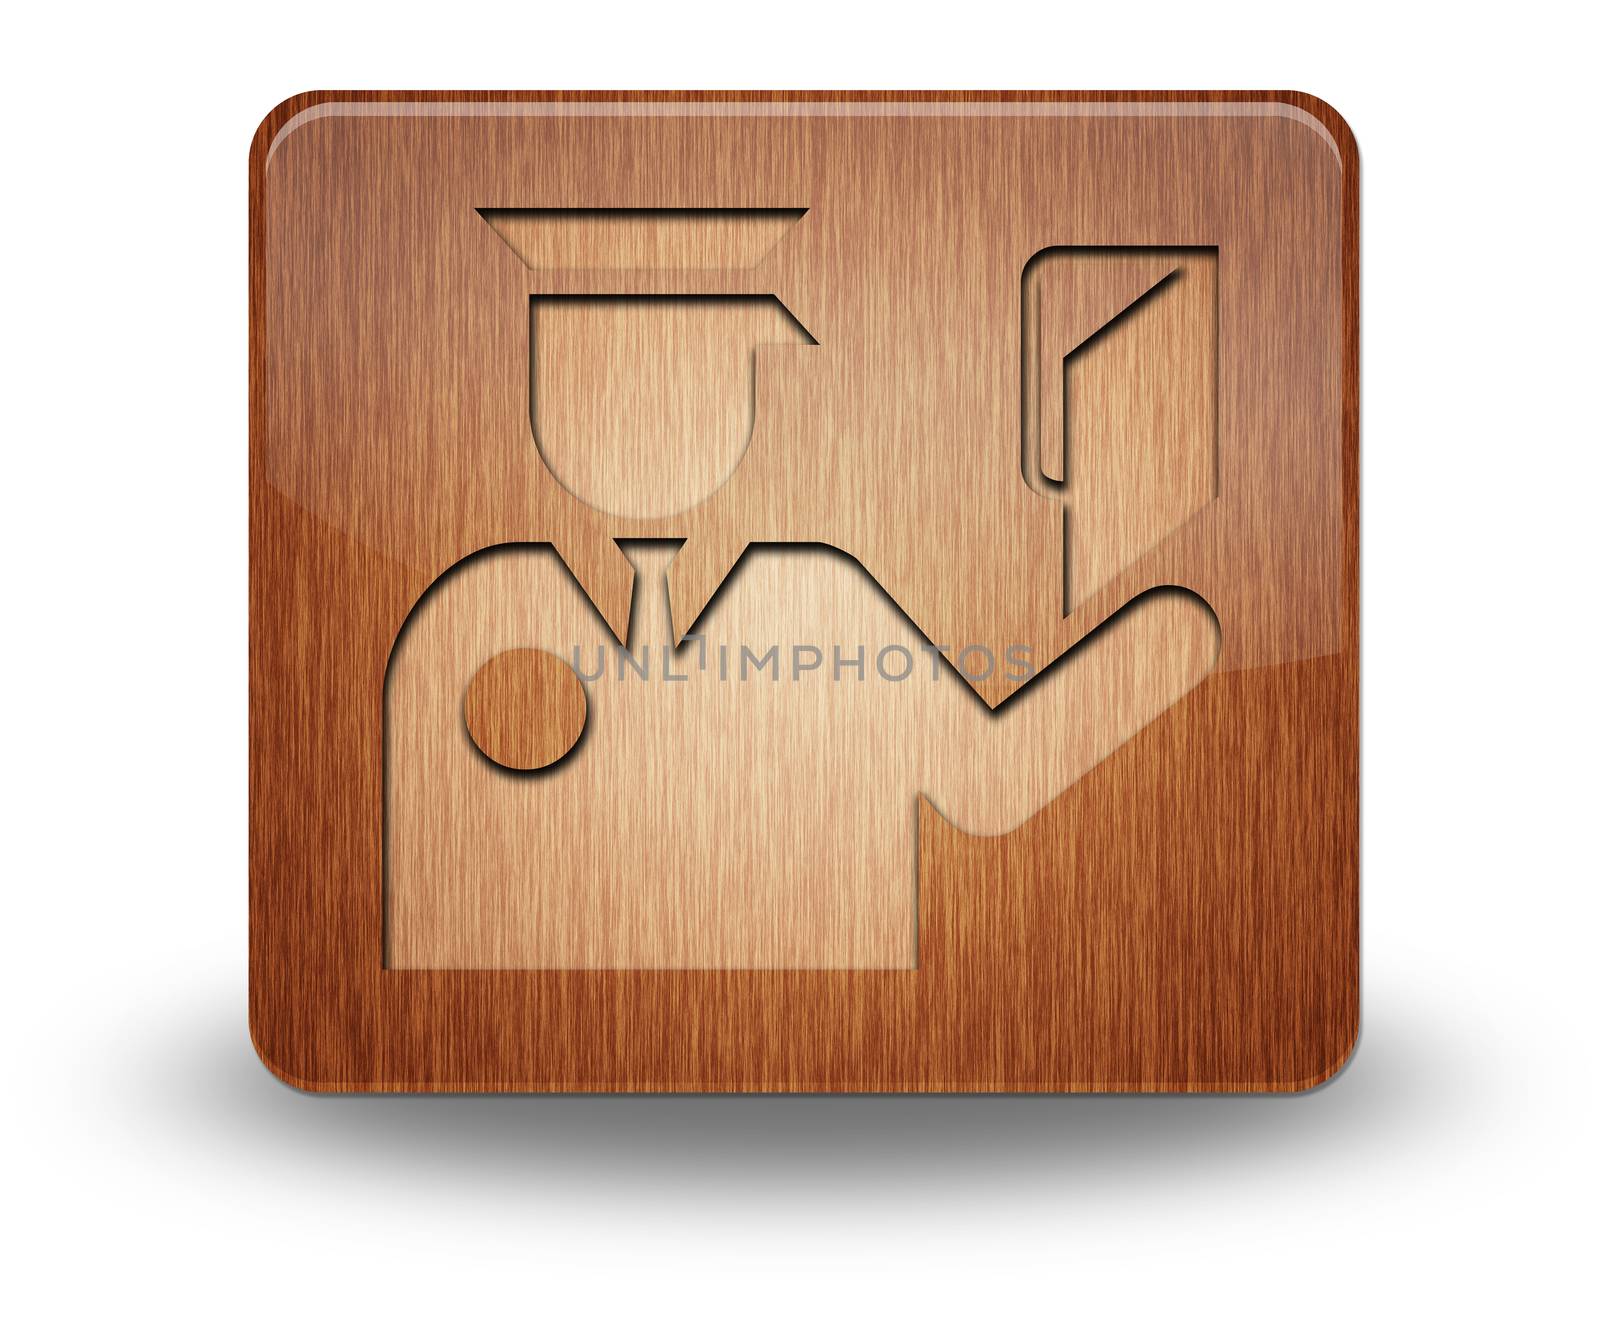 Icon, Button, Pictogram Immigration by mindscanner